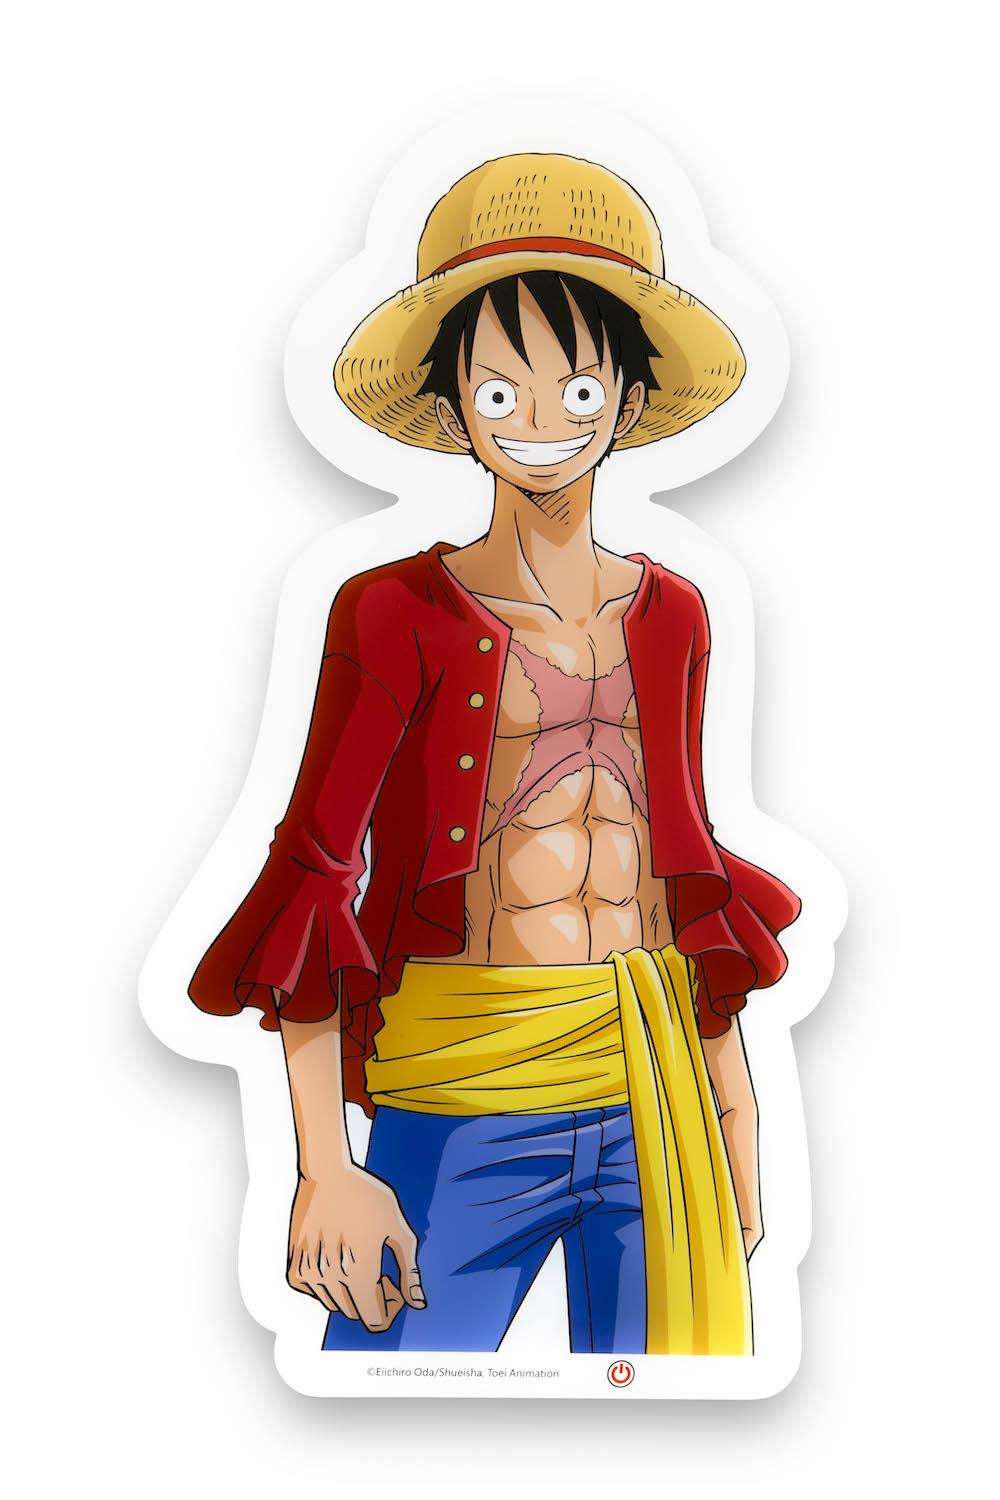 ONE PIECE - Neon Mural Led Luffy